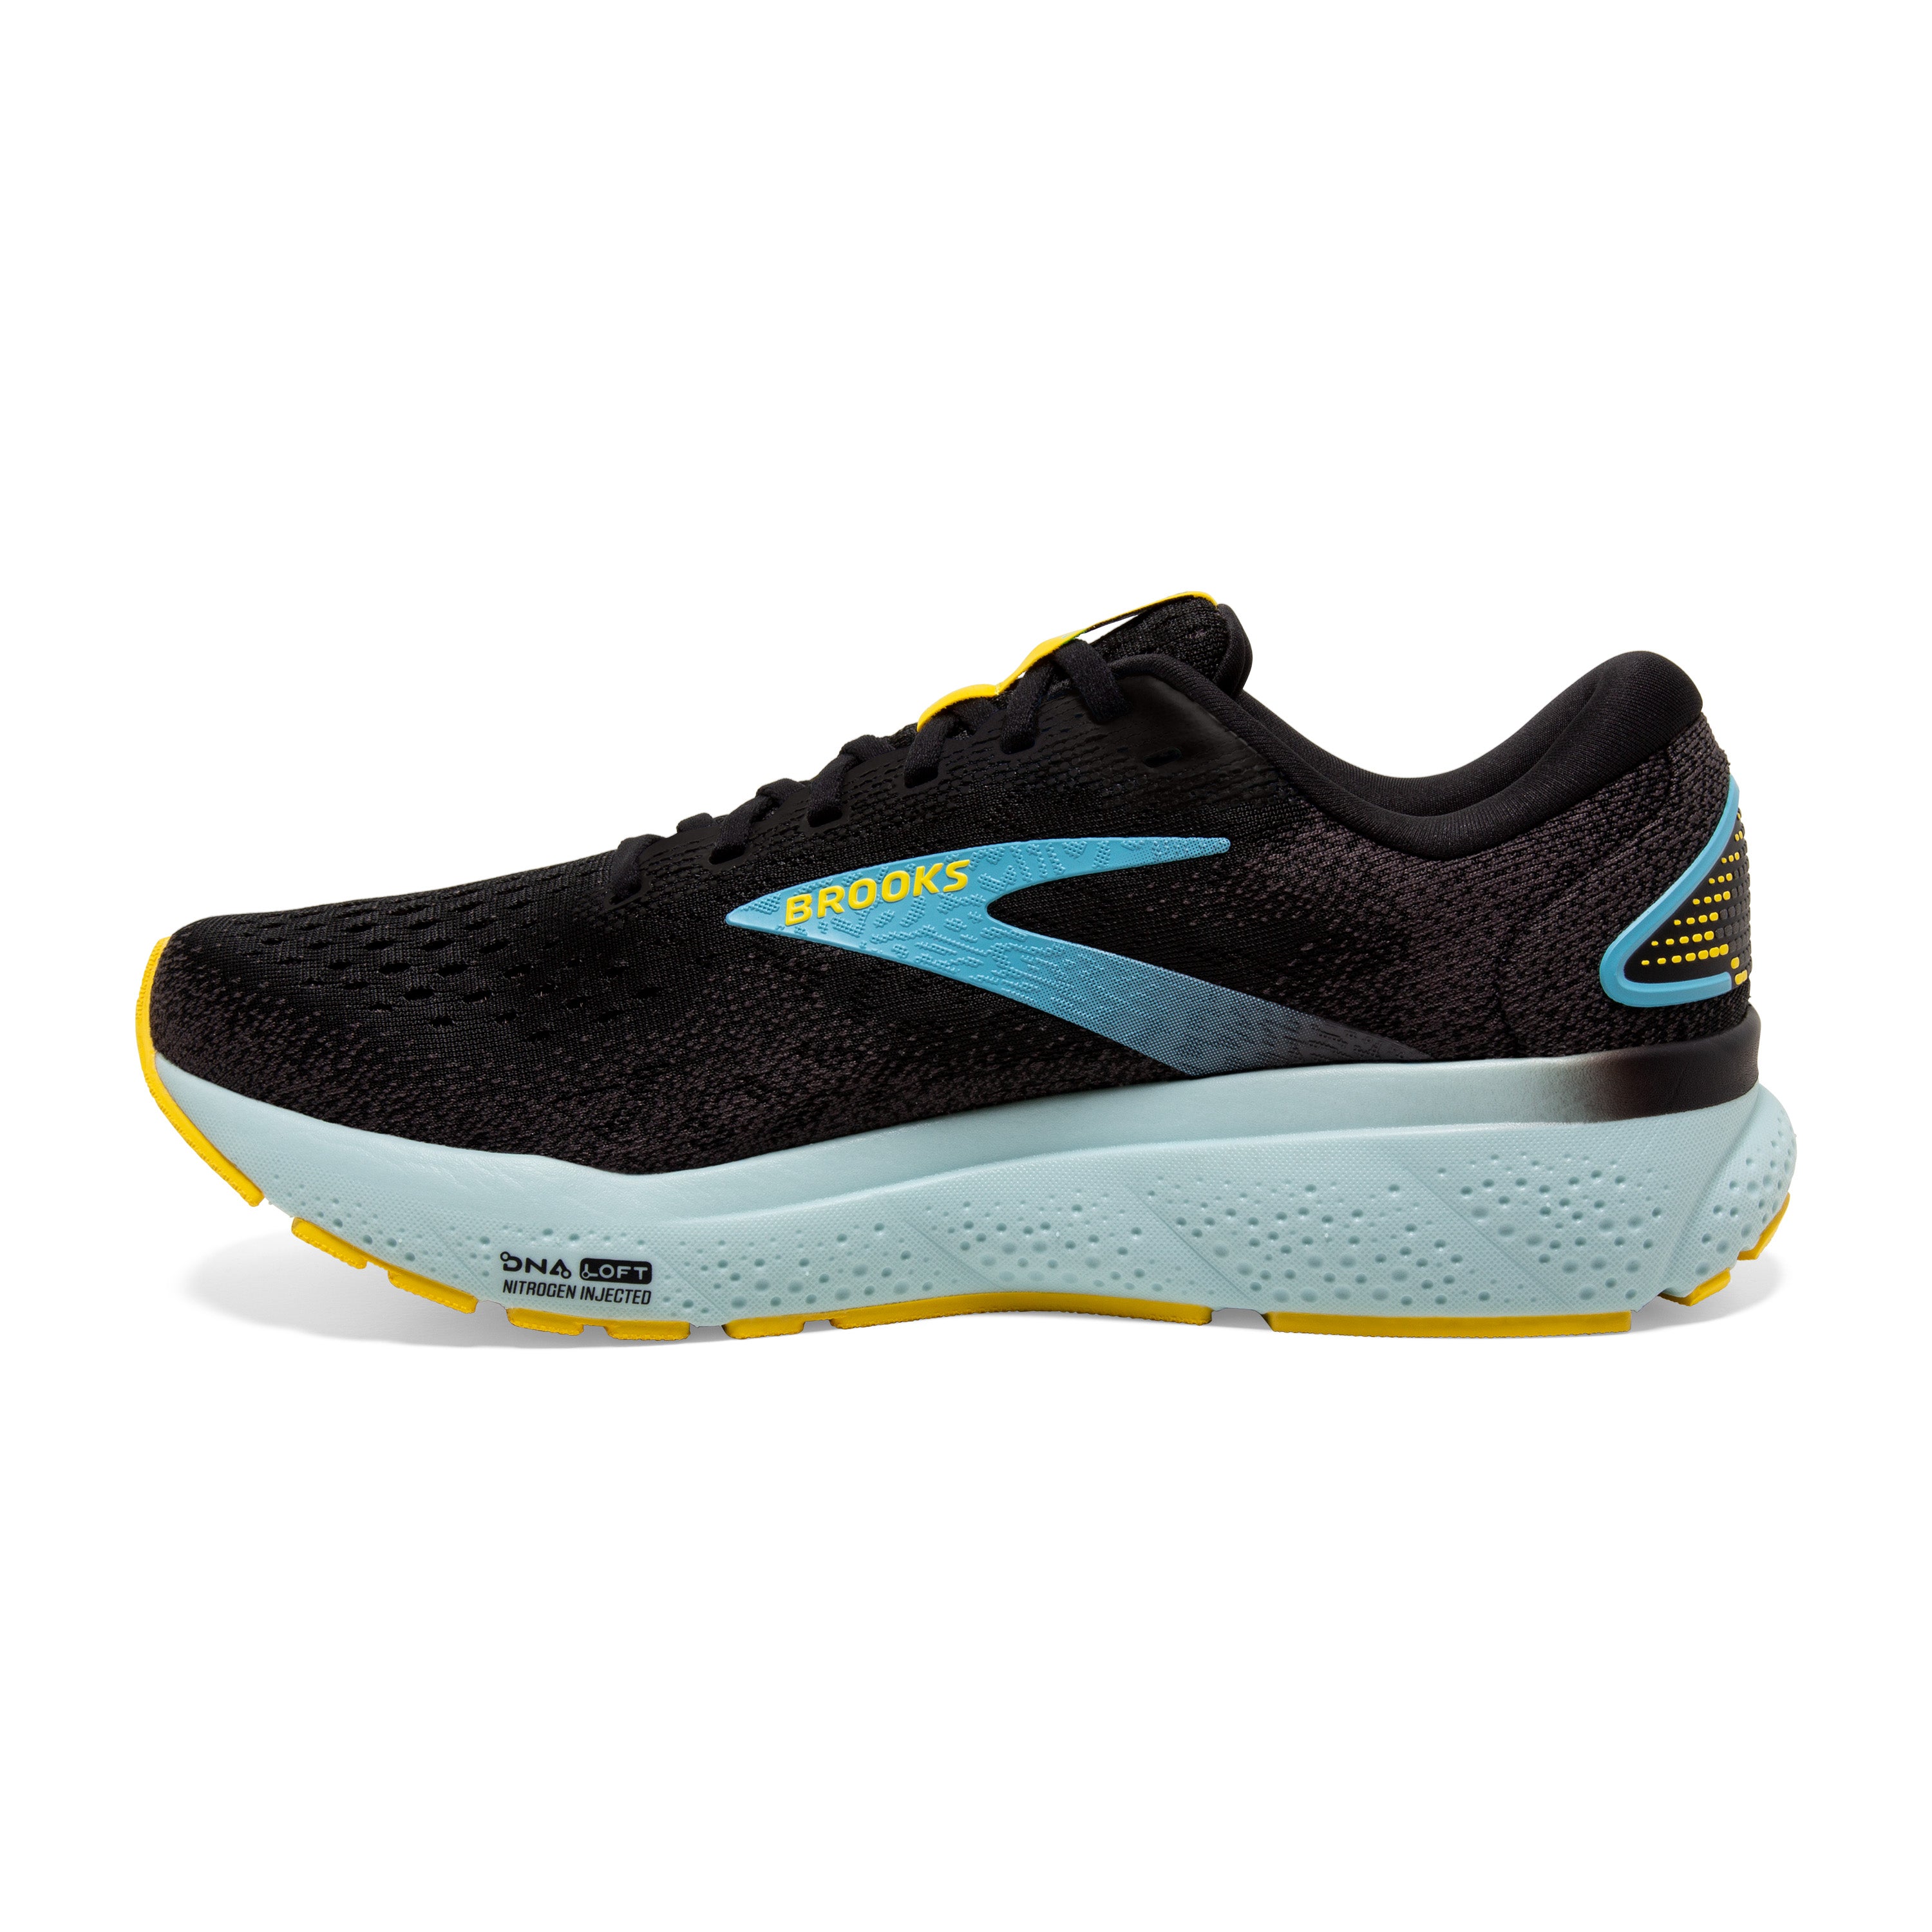 BROOKS MEN'S GHOST 16 - D - 029 BLACK/FORGED IRON/BLUE 